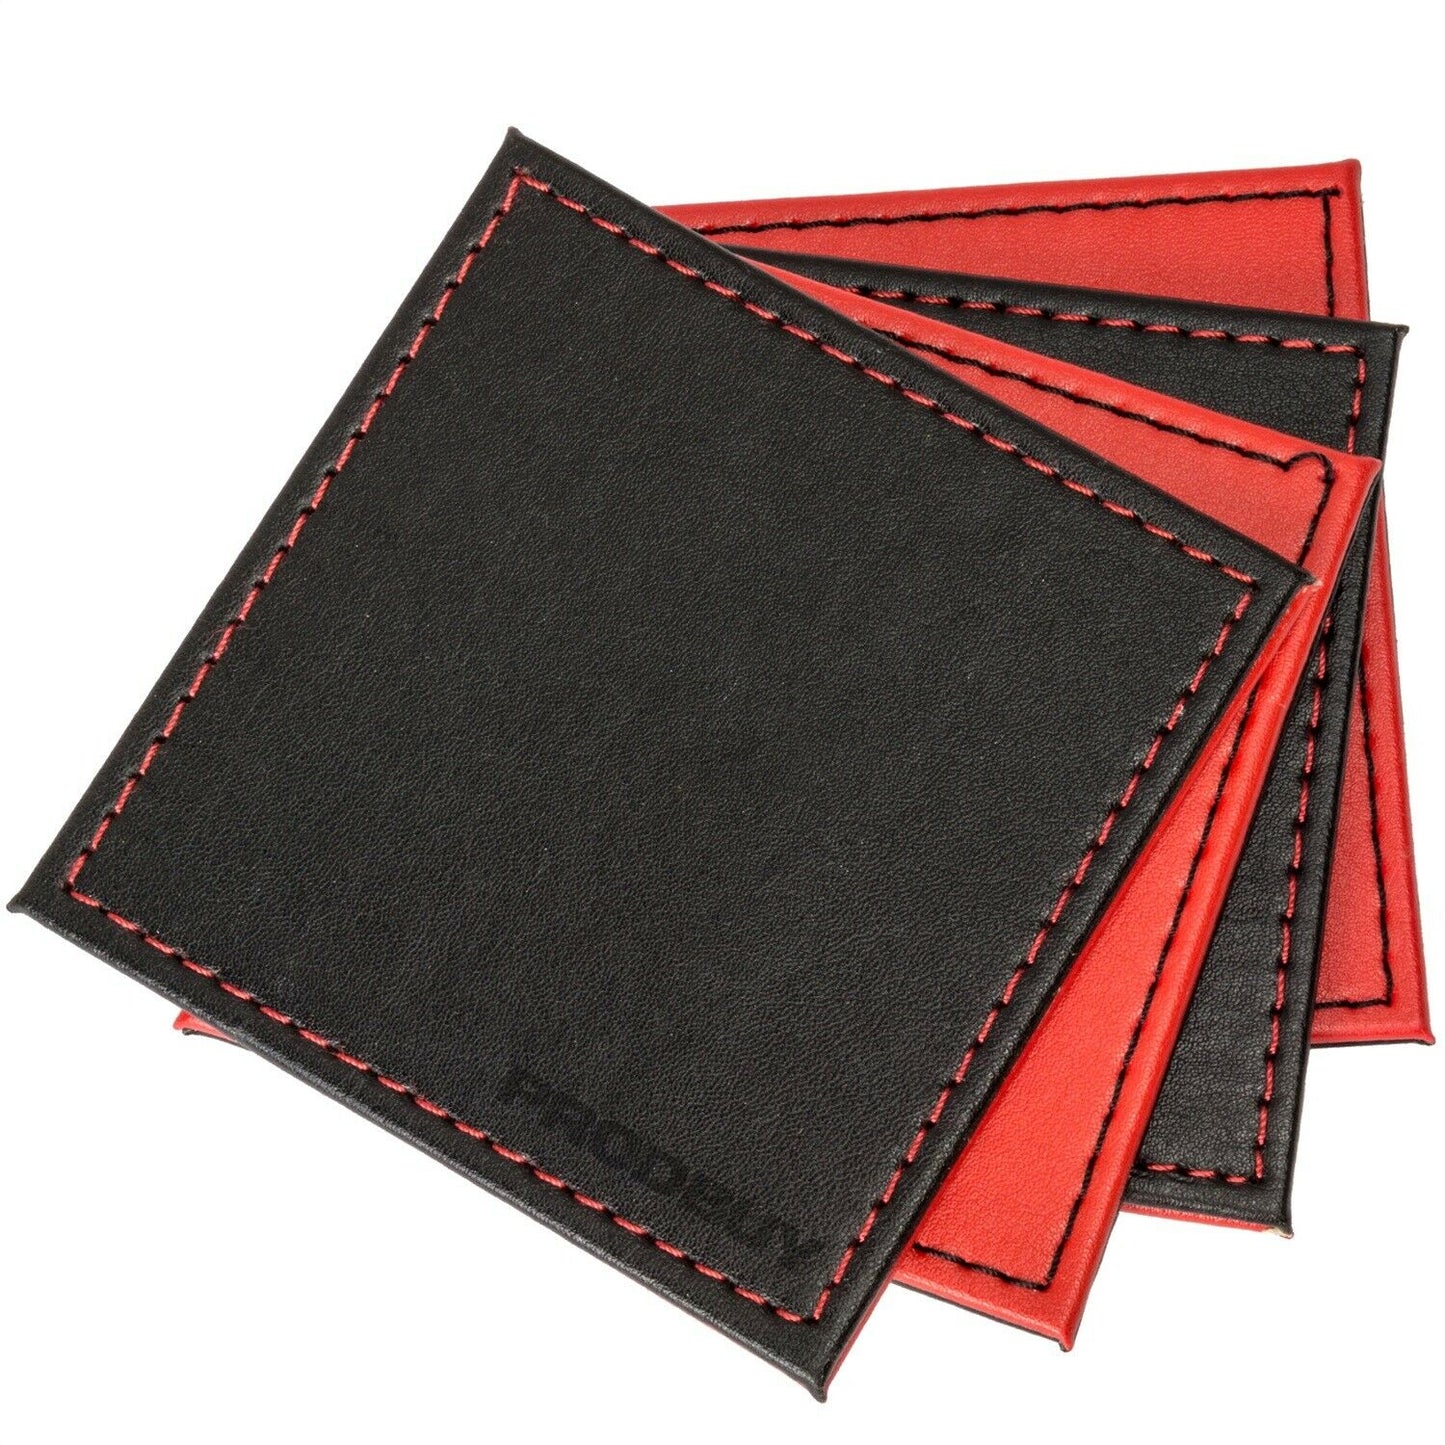 Set of 4 Red & Black Square Faux Leather Coasters